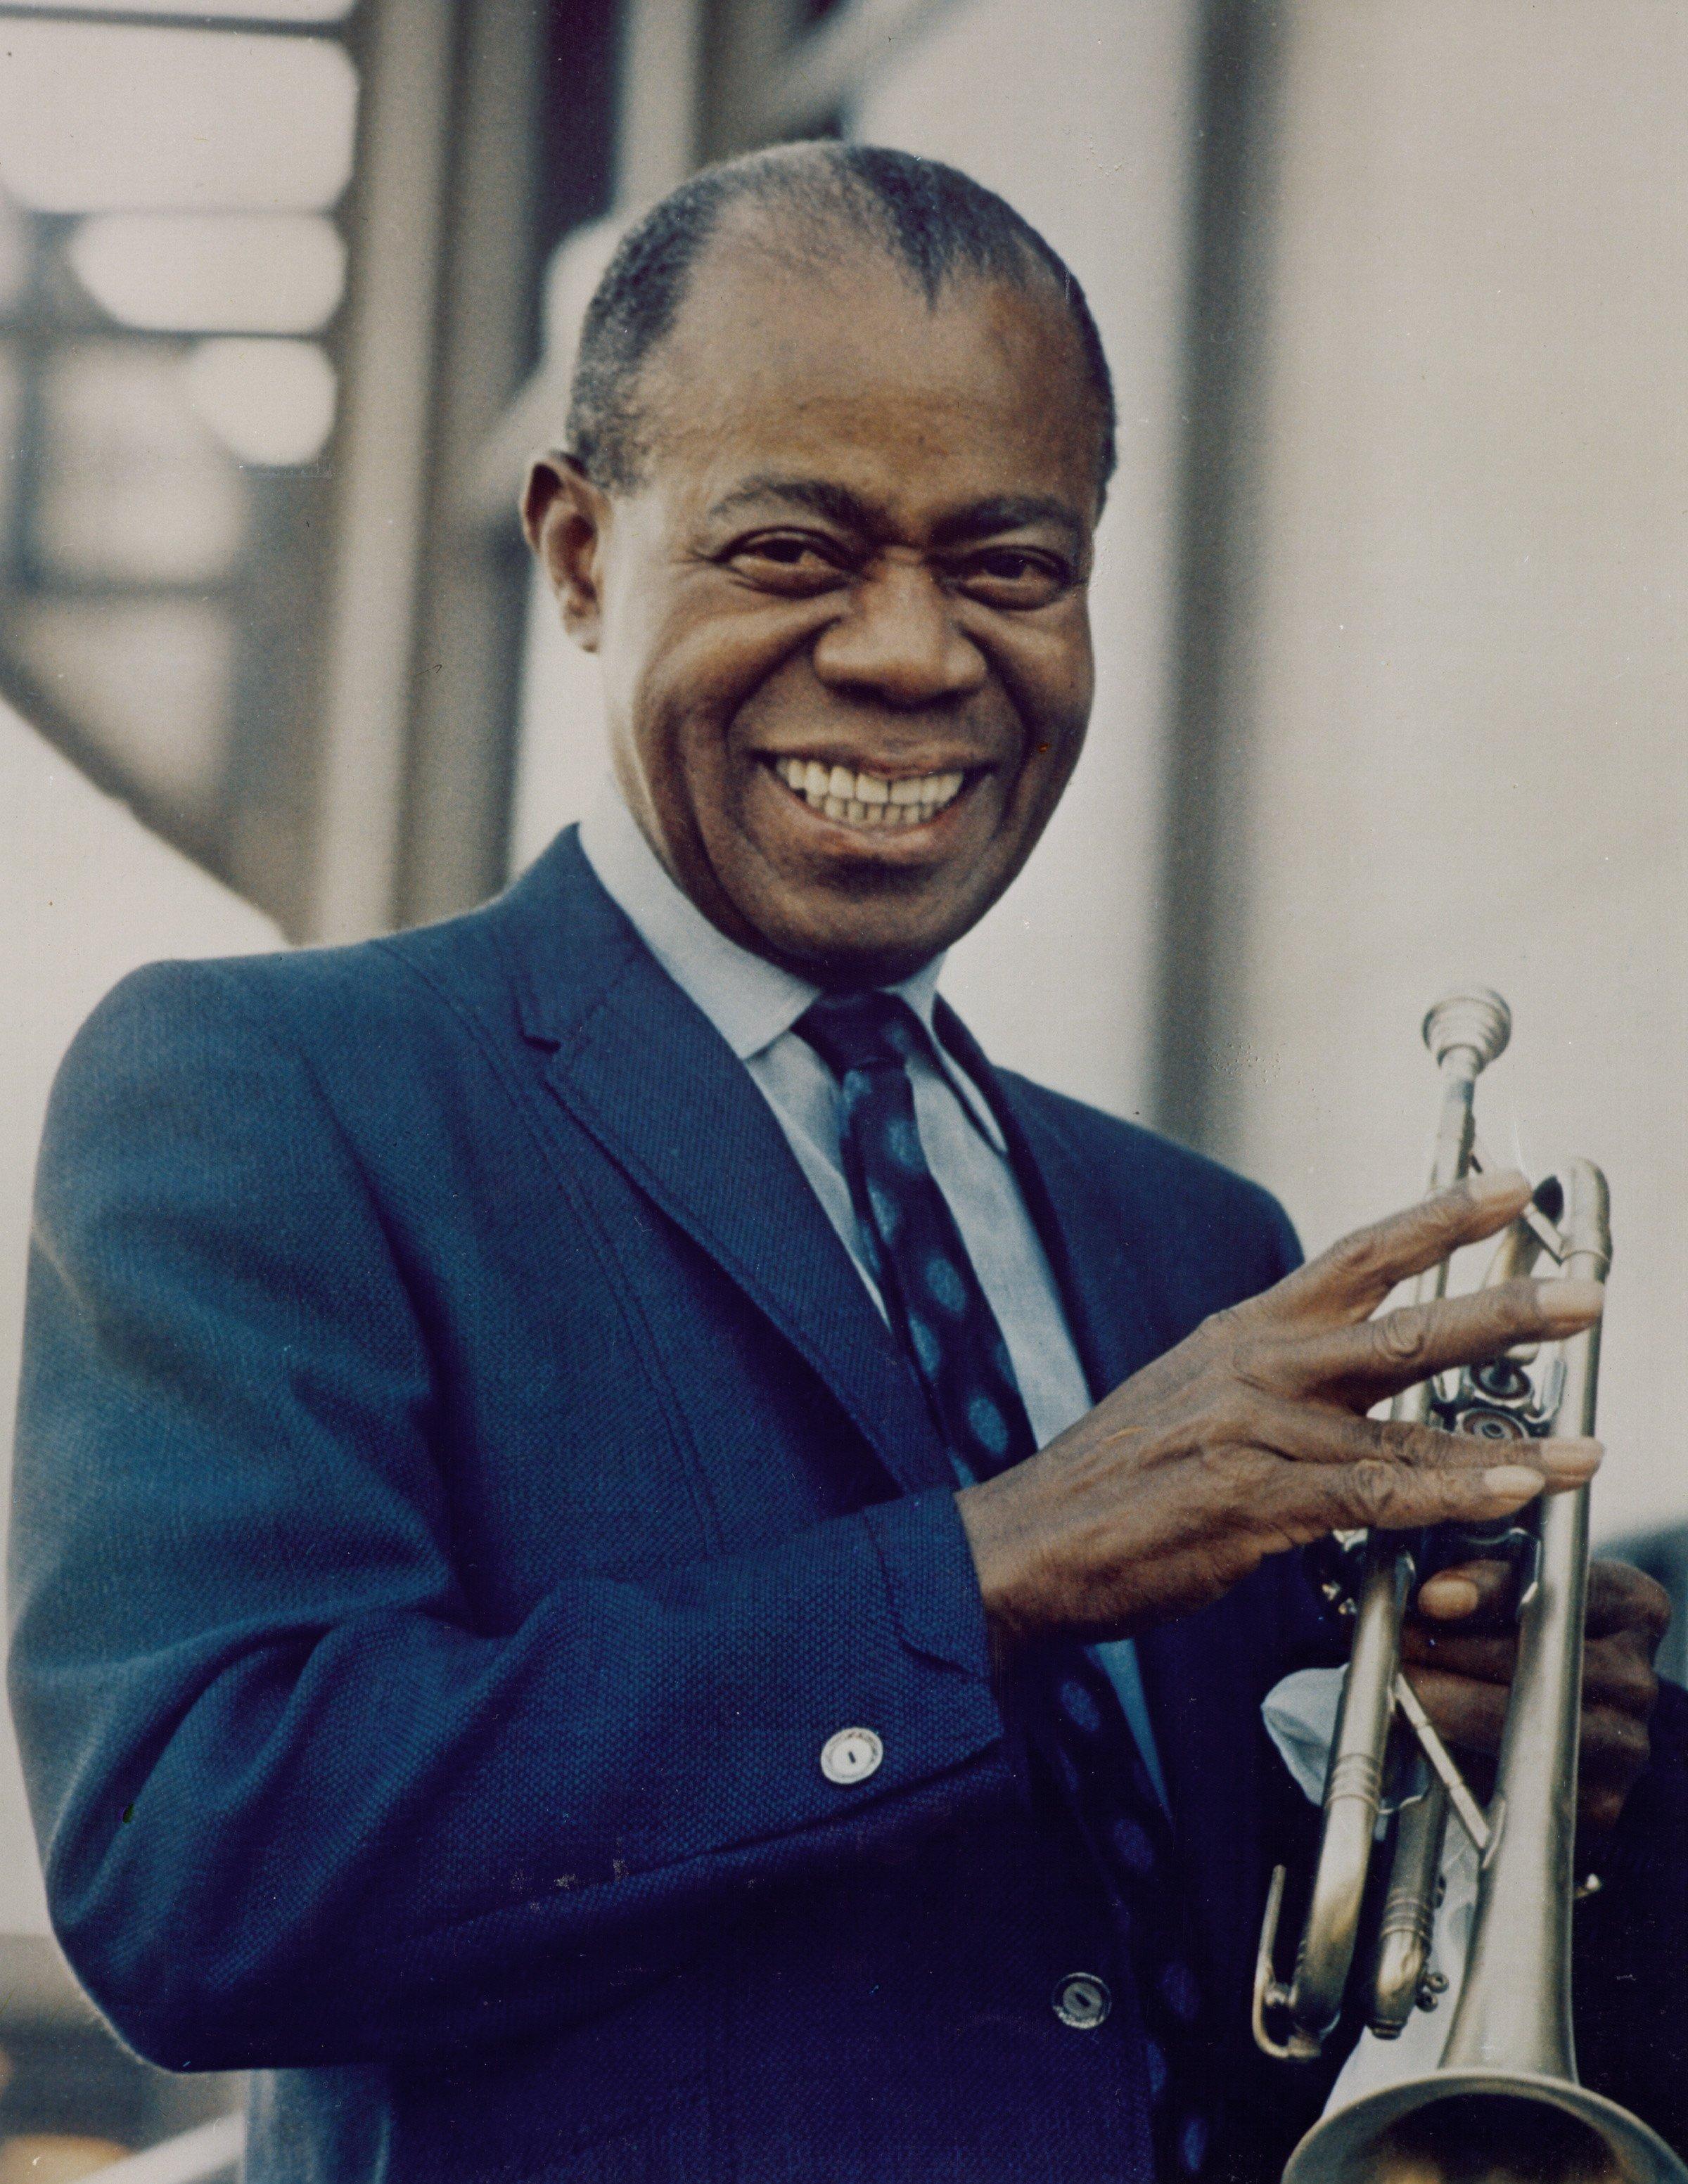 Louis Armstrong in 1970